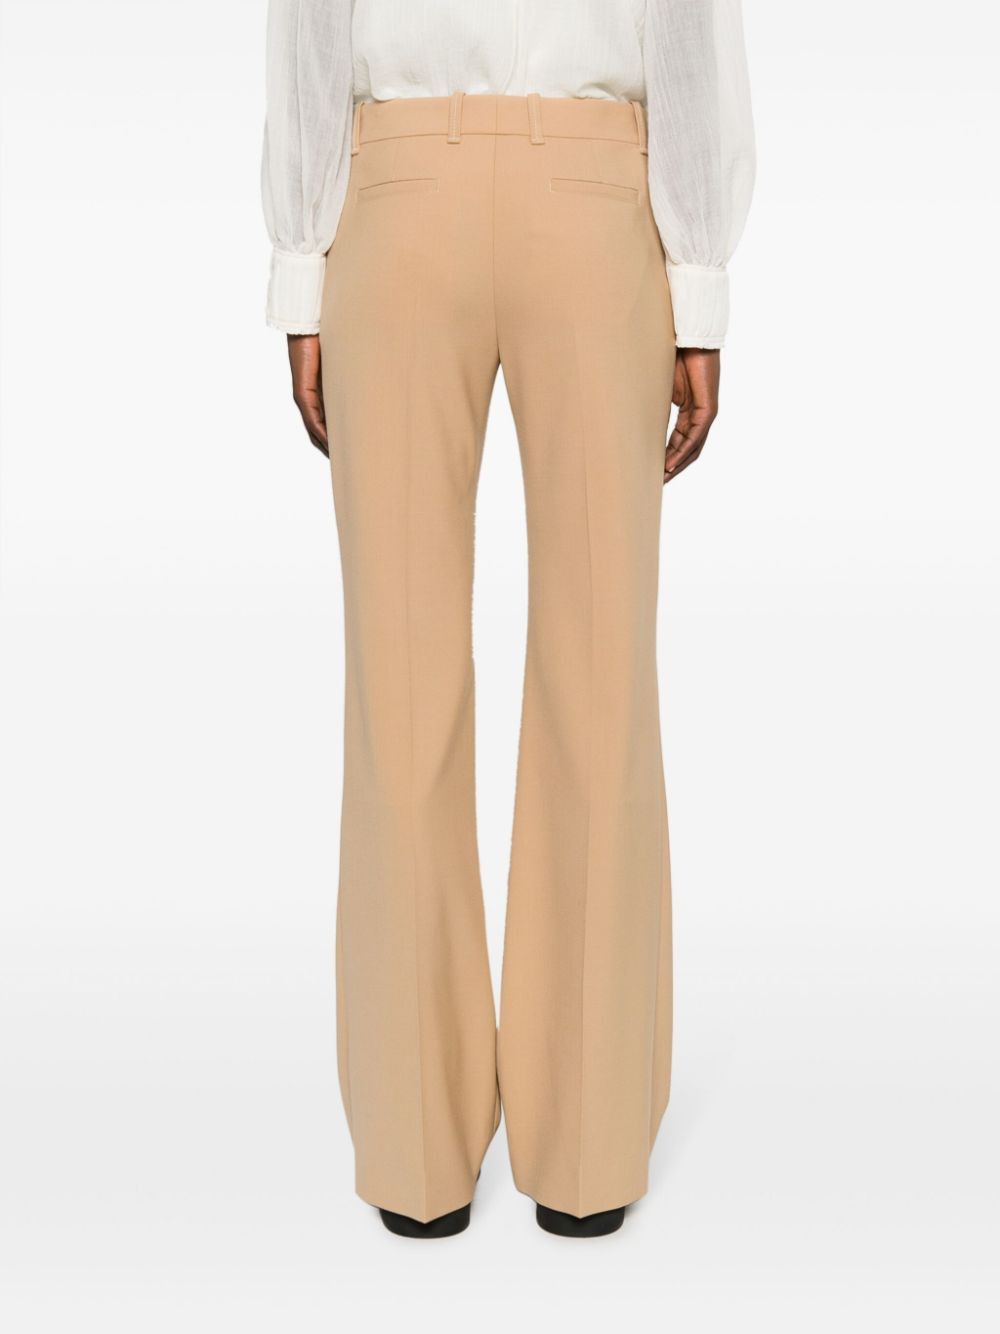 Pearlbeige Wool Blend Pants for Women - FW23 Collection